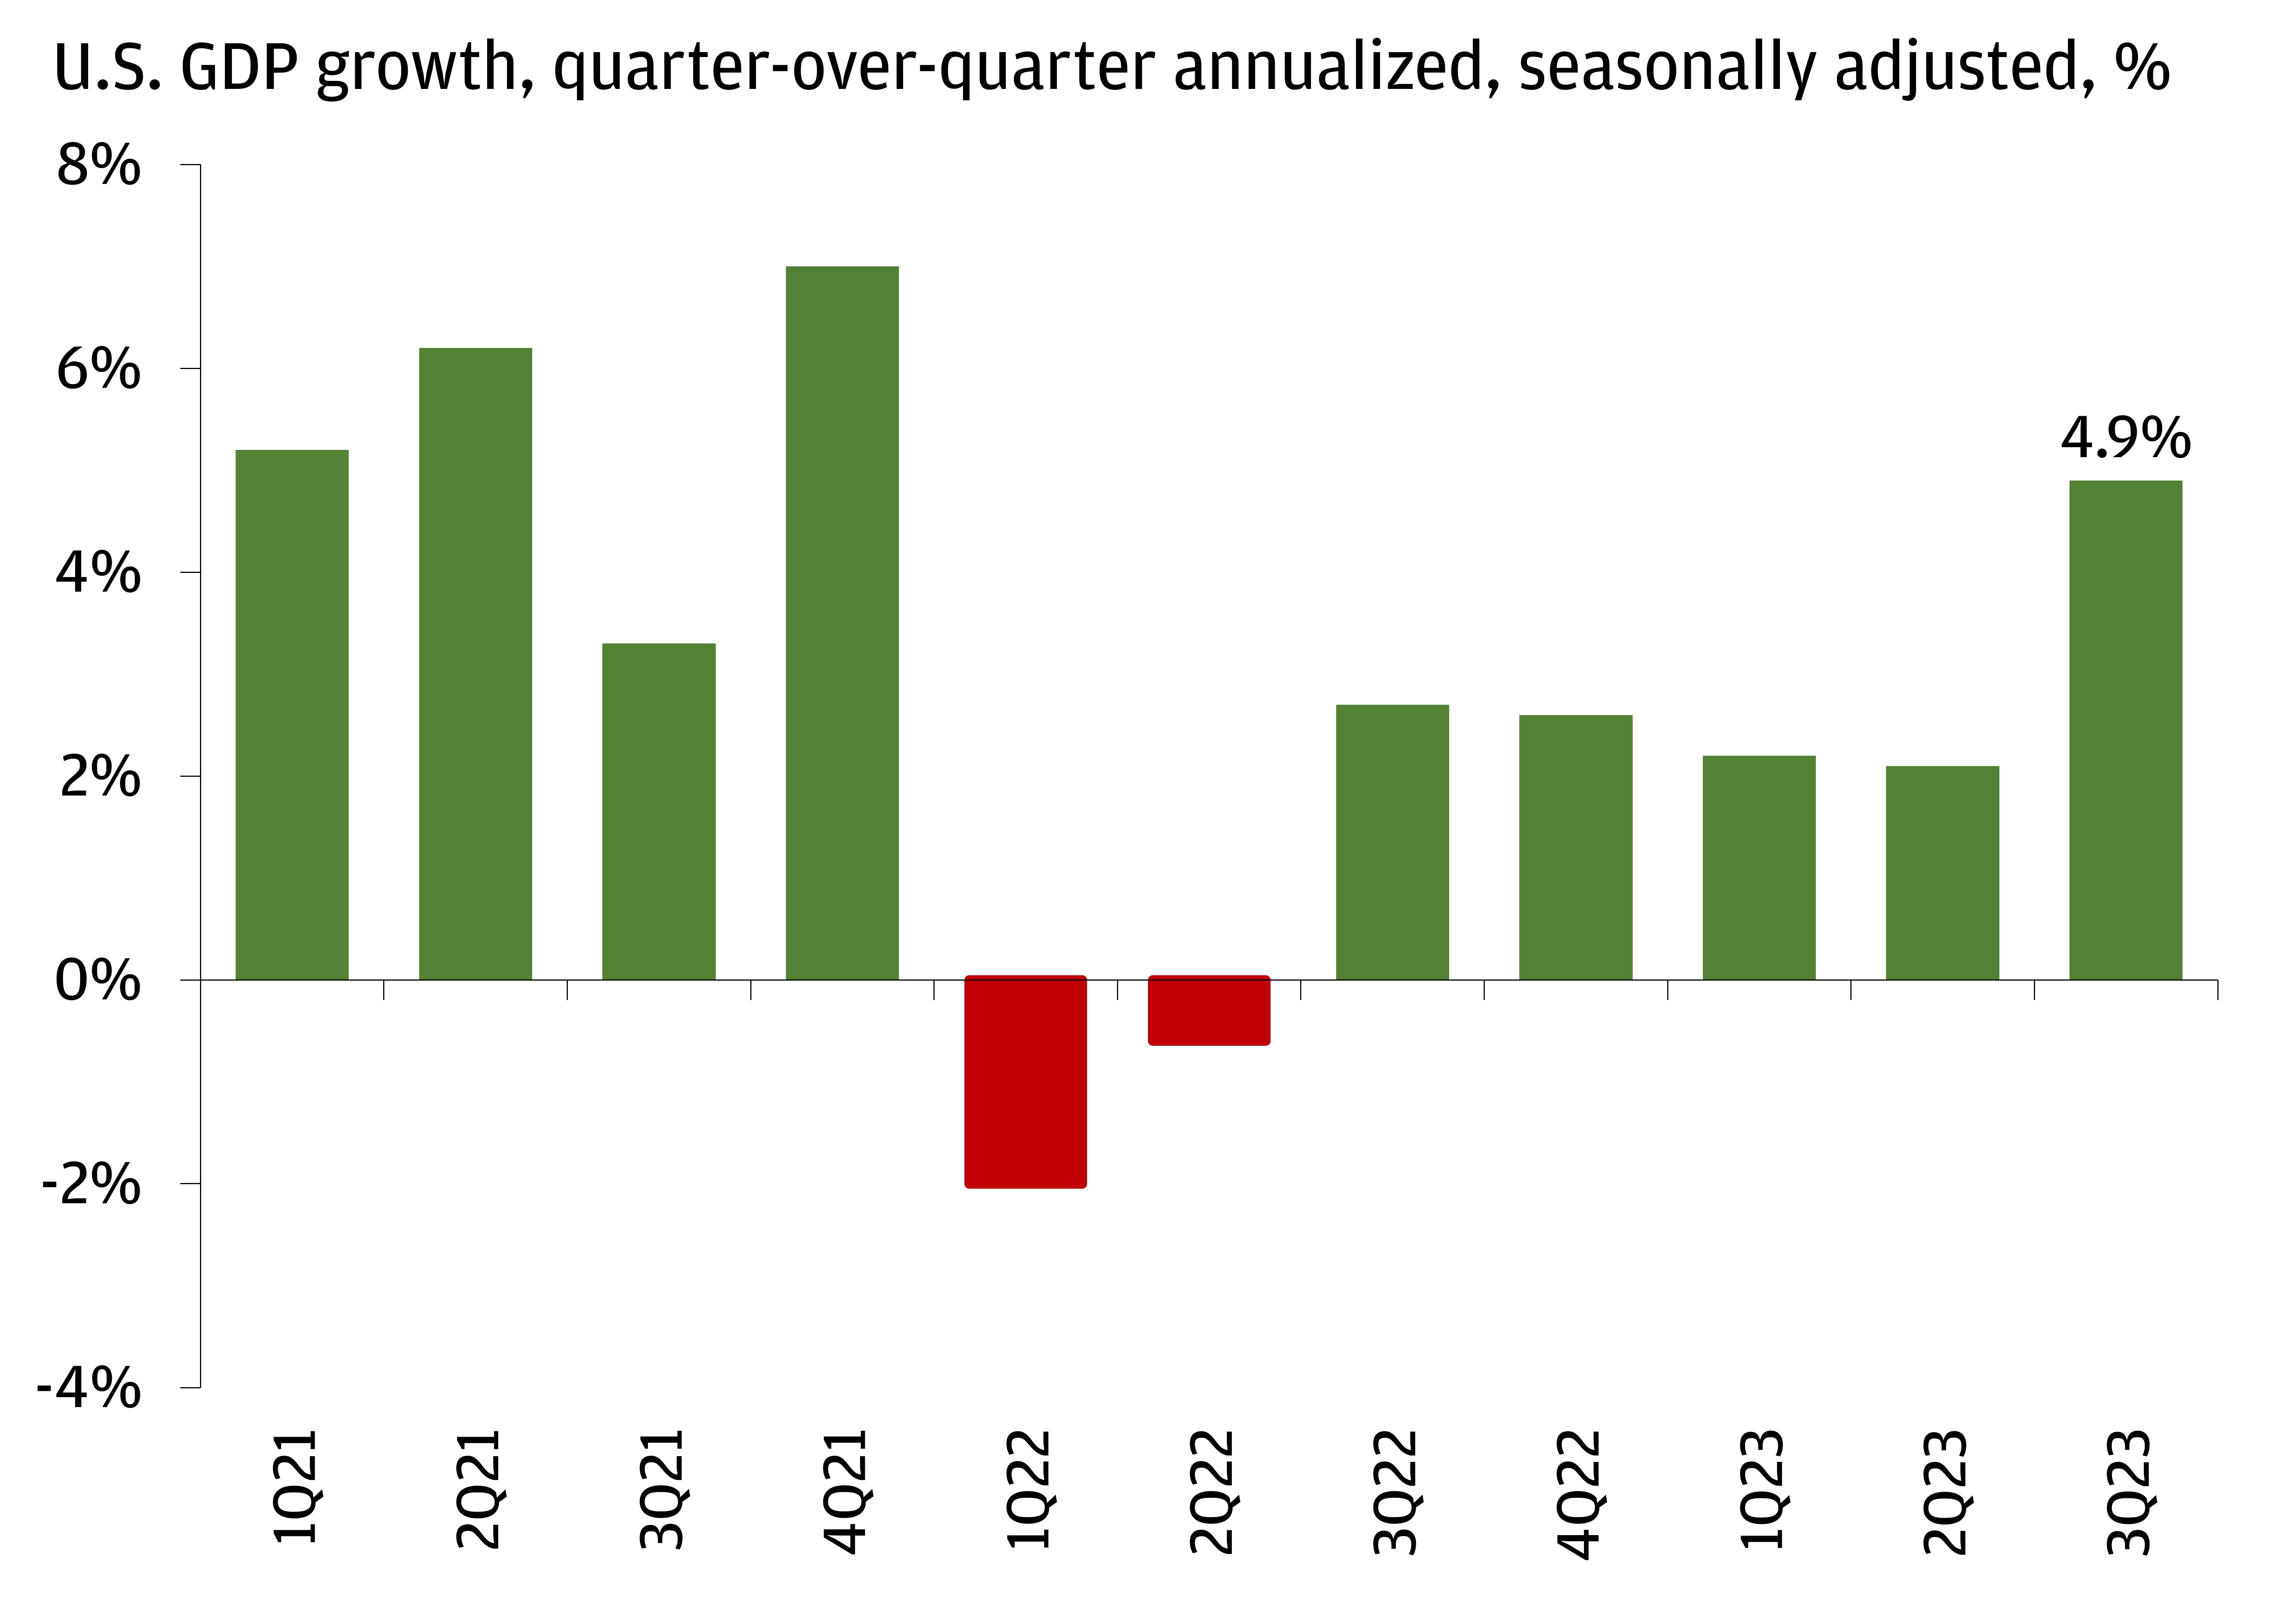 This chart shows historical U.S. quarterly GDP on an annualized basis starting in 1Q21 and ending in 3Q23.